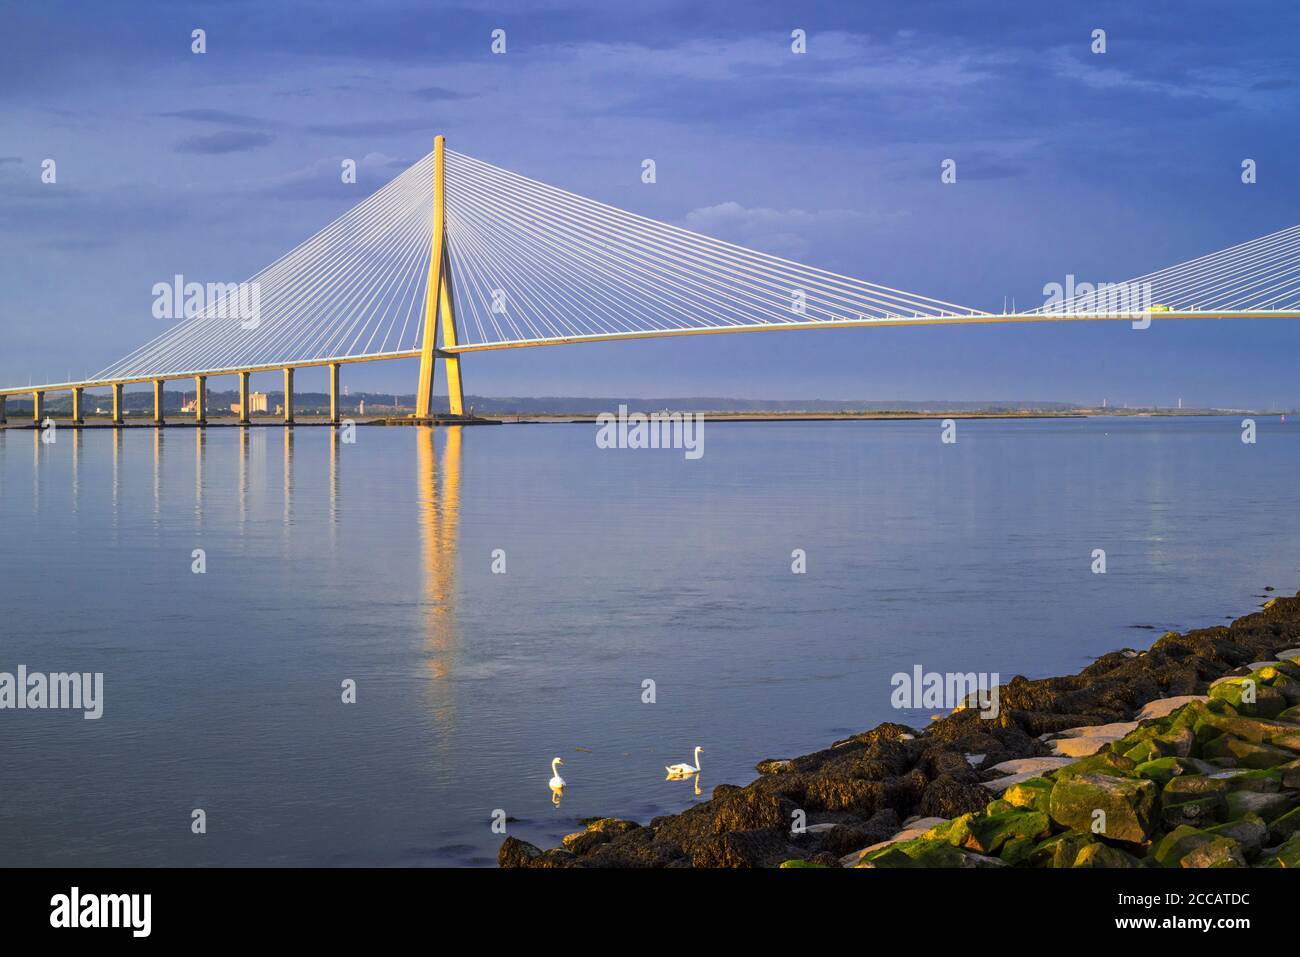 Pont de Normandie / Bridge of Normandy, cable-stayed road bridge over the river Seine linking Le Havre to Honfleur, Normandy, France Stock Photo